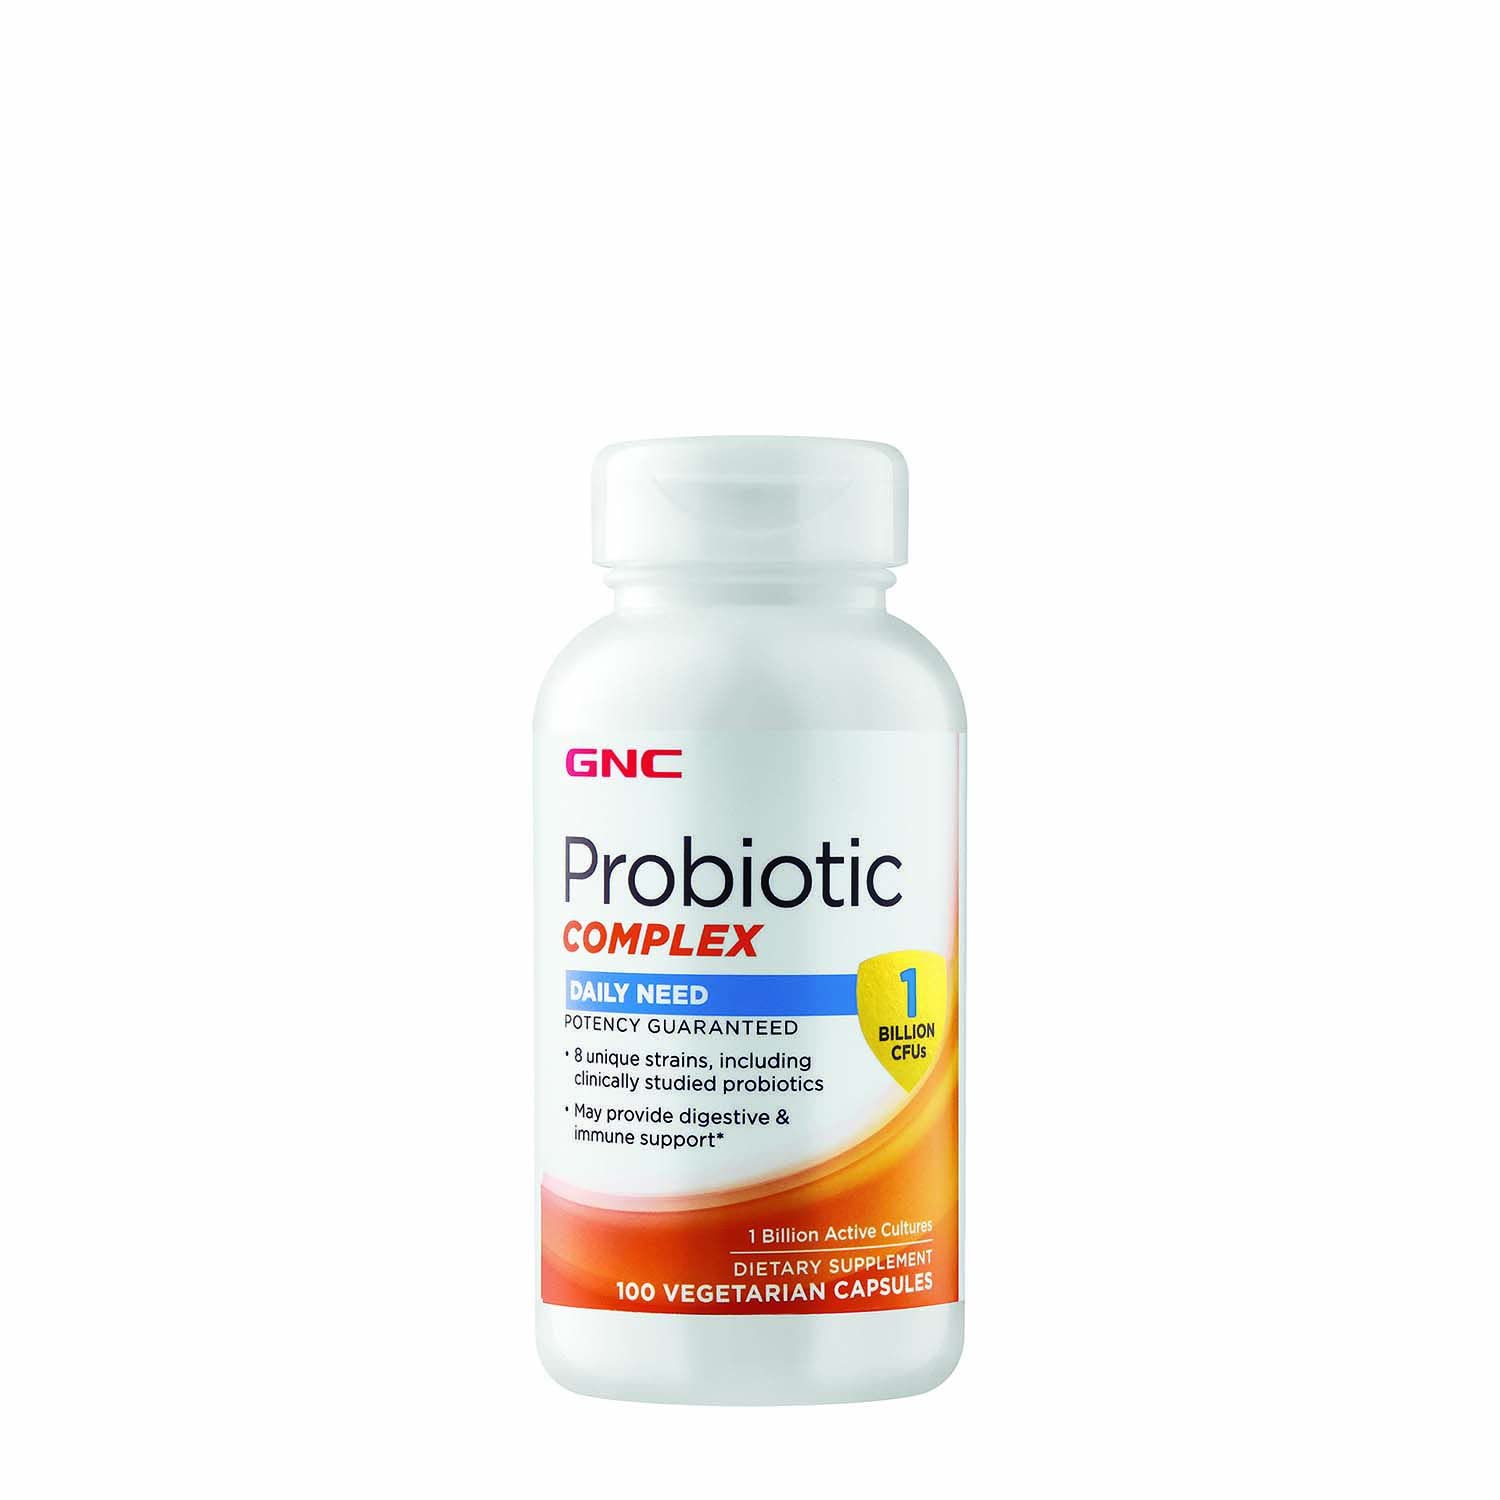 GNC Probiotic Complex Daily Need with 1 Billion CFUs, 100 Capsules, Daily Probiotic Support